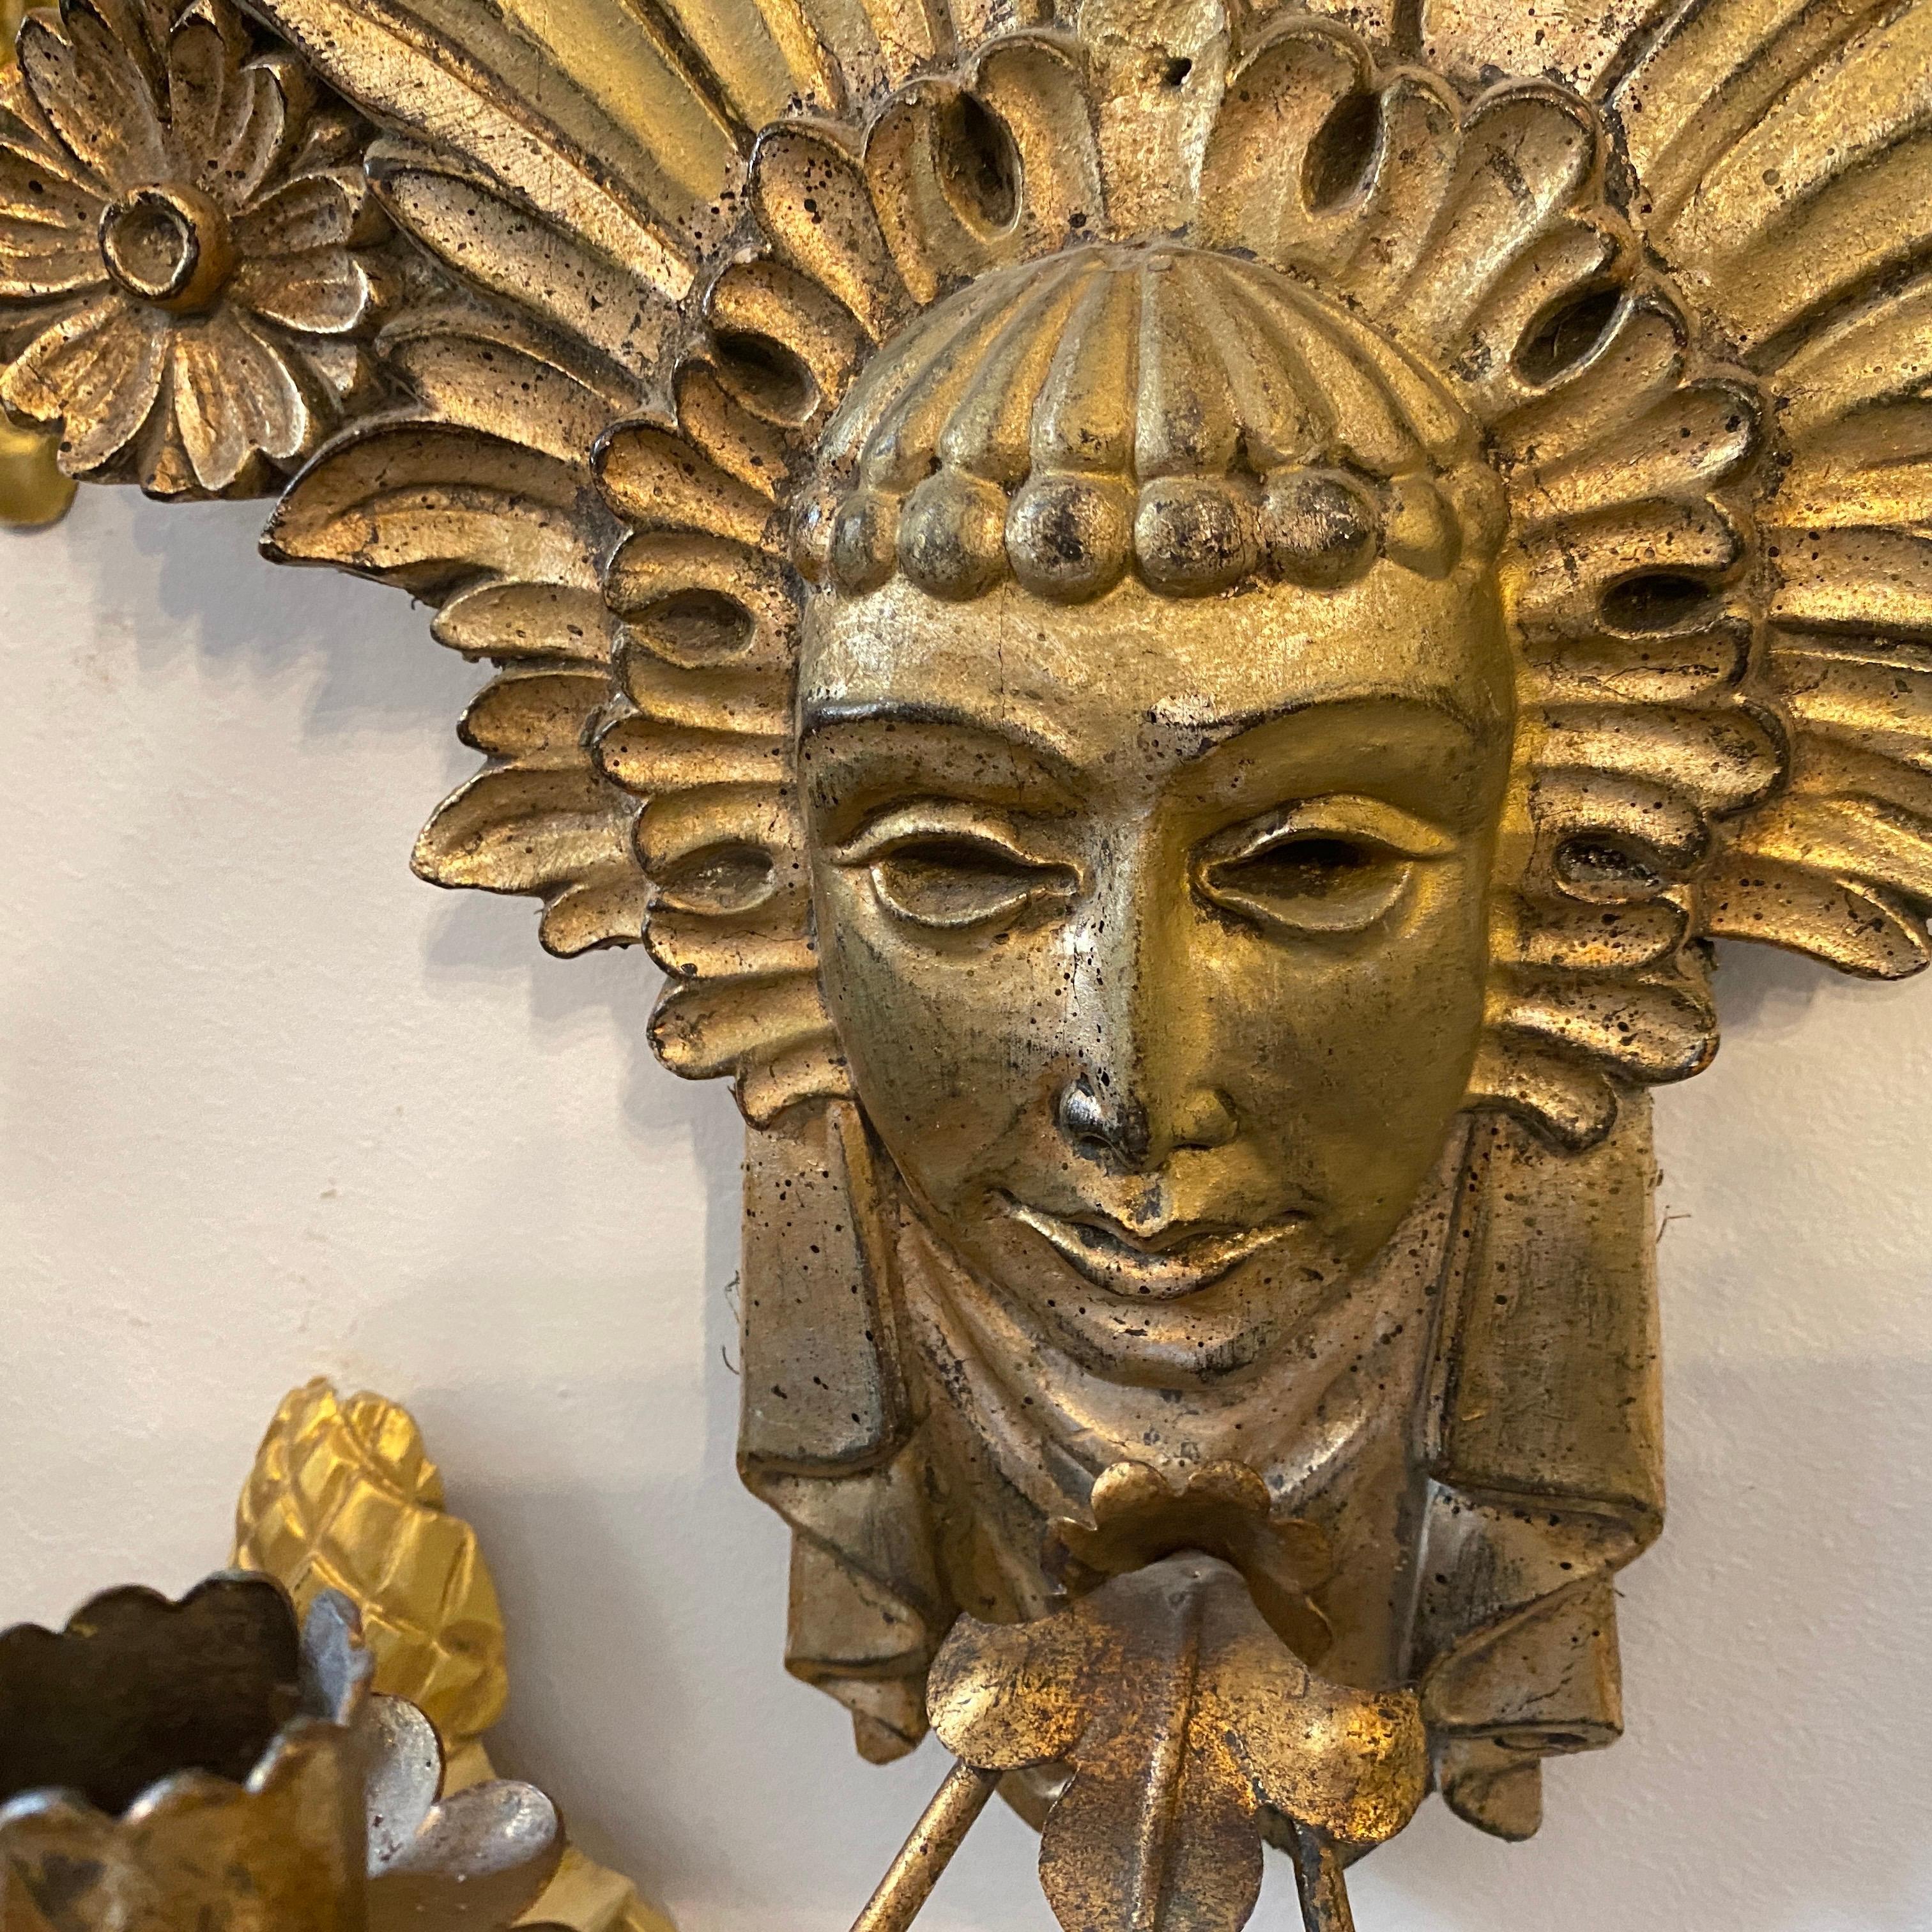 It's a wall candelabra made in Italy in 1900, old gilded wood and iron are in good conditions considering use and age. It can be easily electrified.